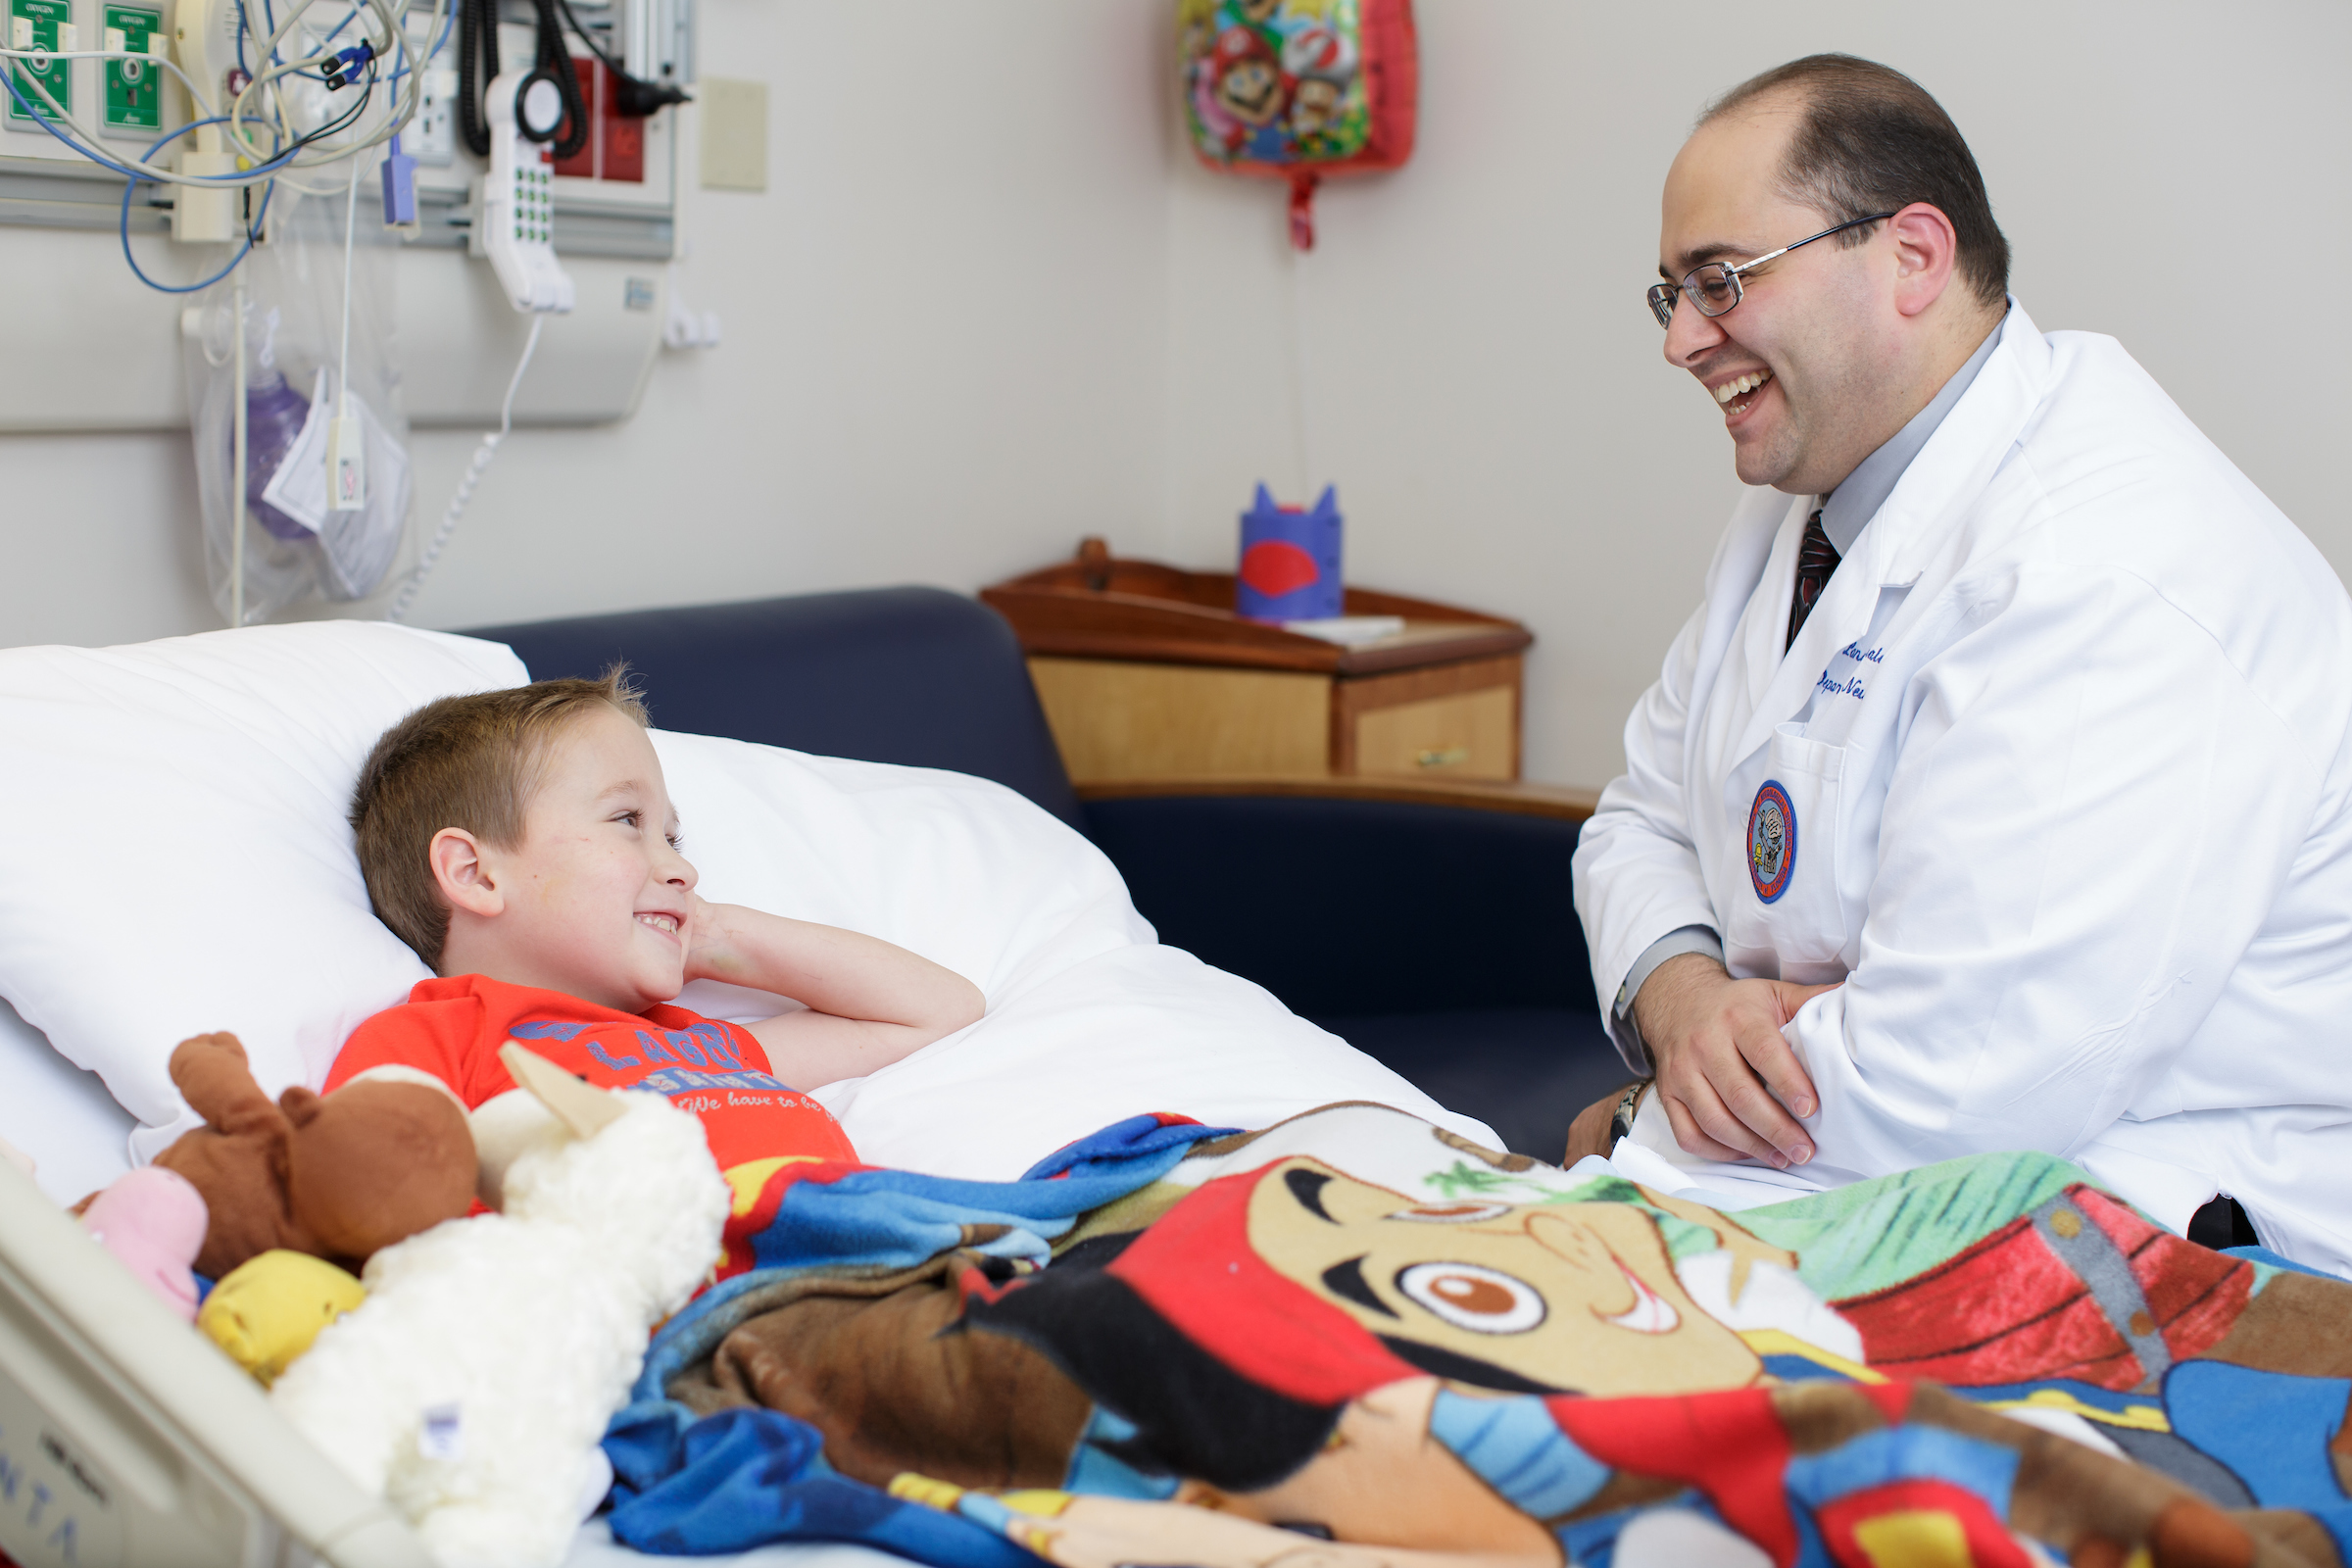 UF Health Children's Hospital neurosurgeon laughs with a young male patient who is lying down in a hospital bed.